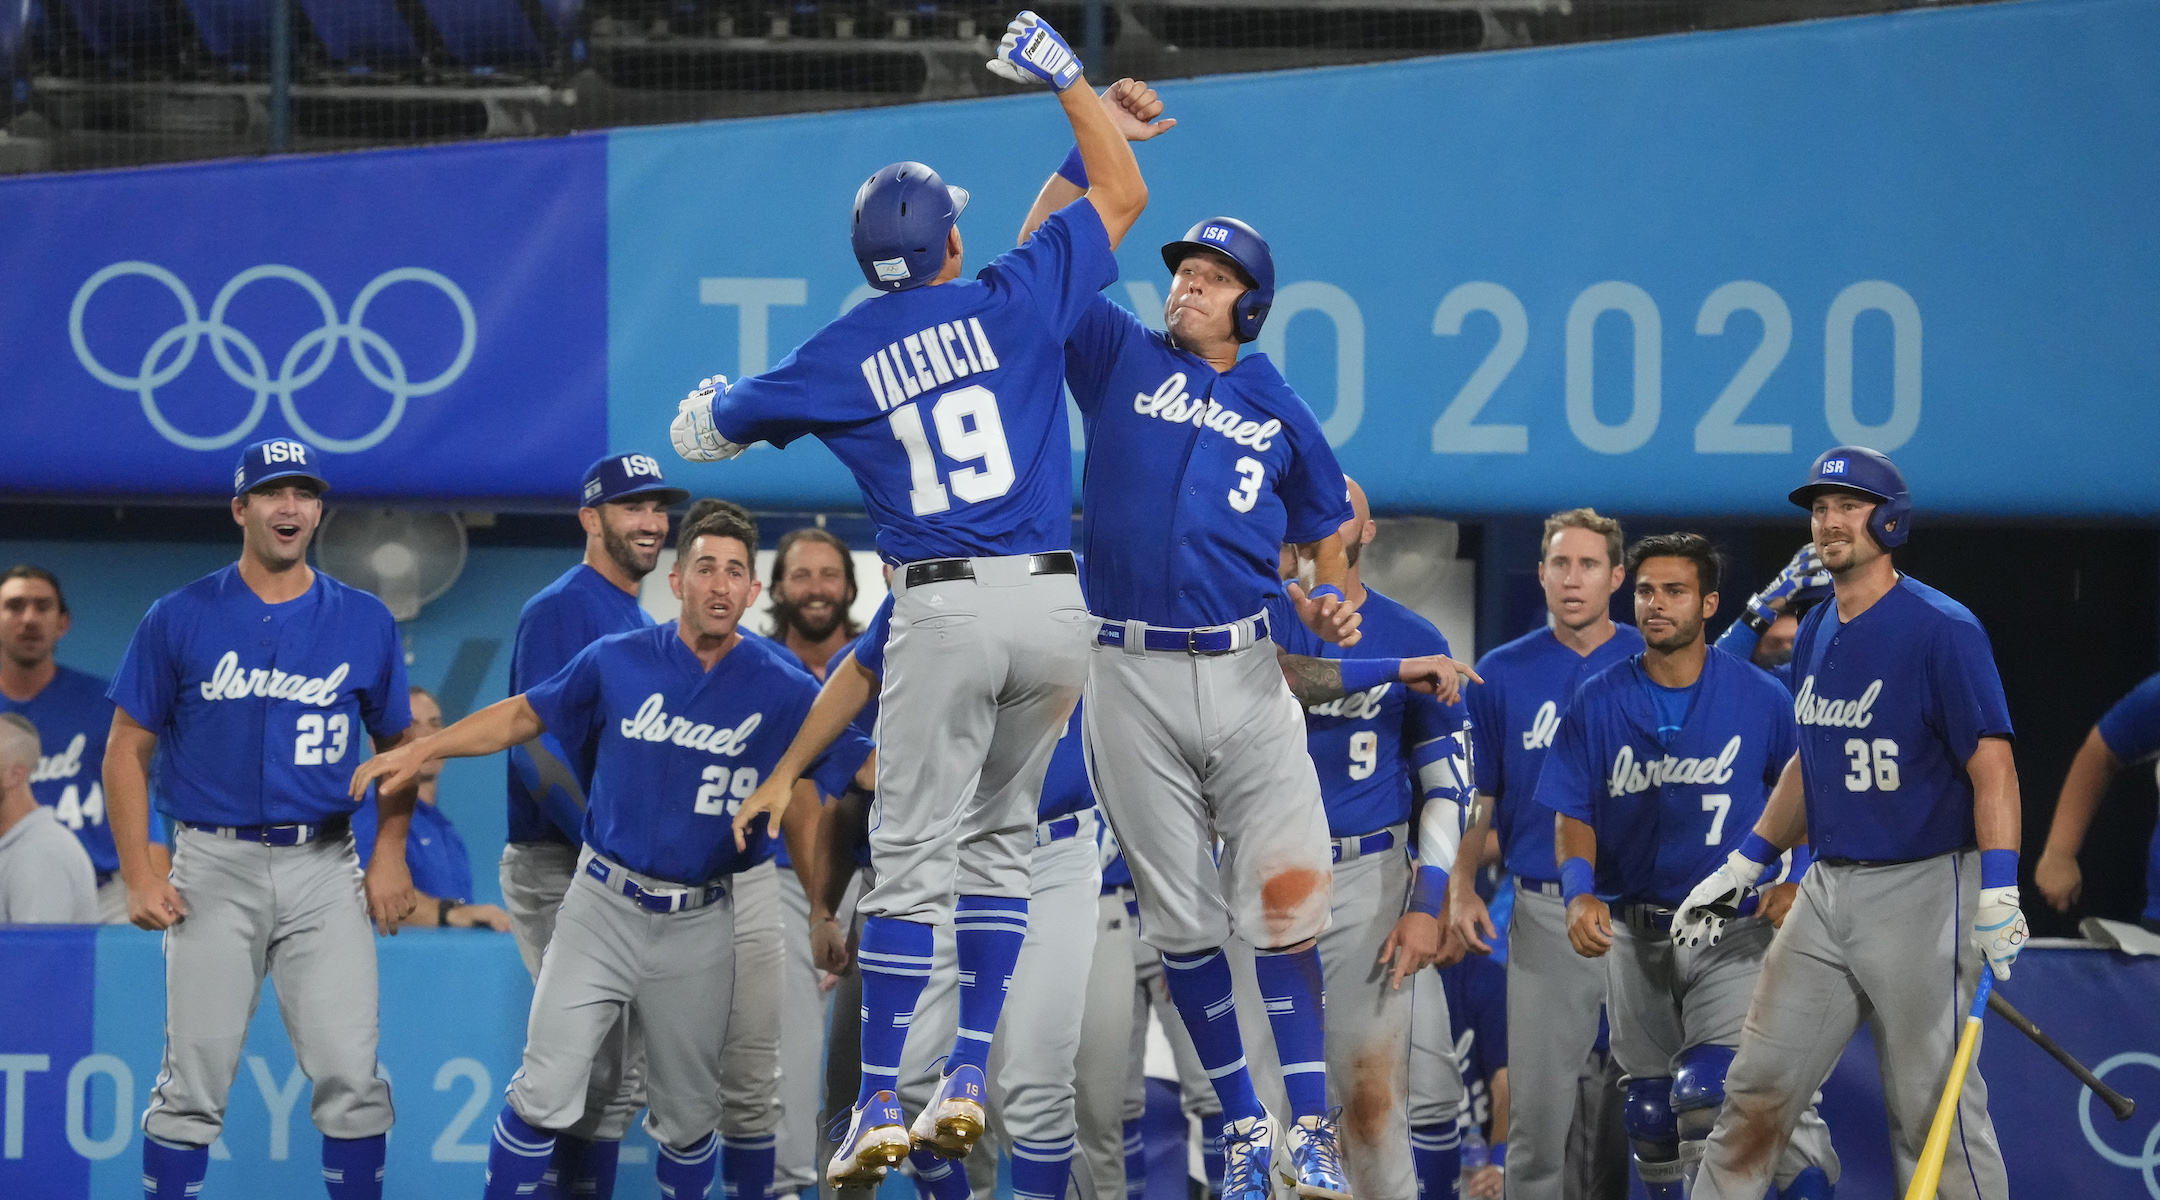 Team Israel celebrates during a game at the 2020 Tokyo Olympics. (Courtesy Ironbound Films)